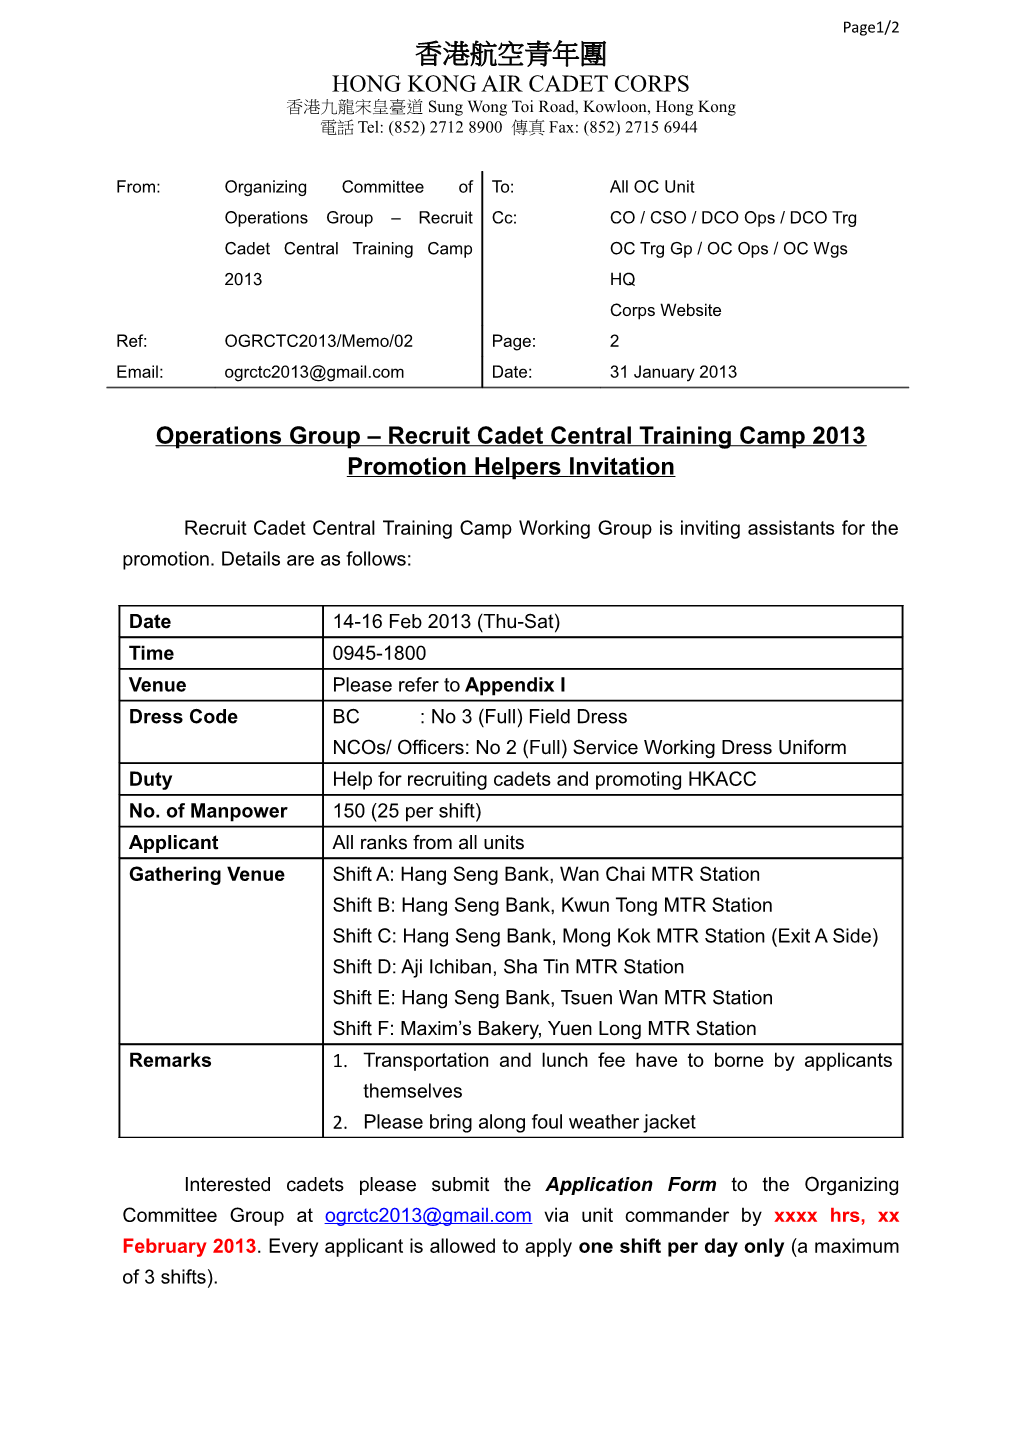 Operations Group Recruit Cadet Central Training Camp 2013